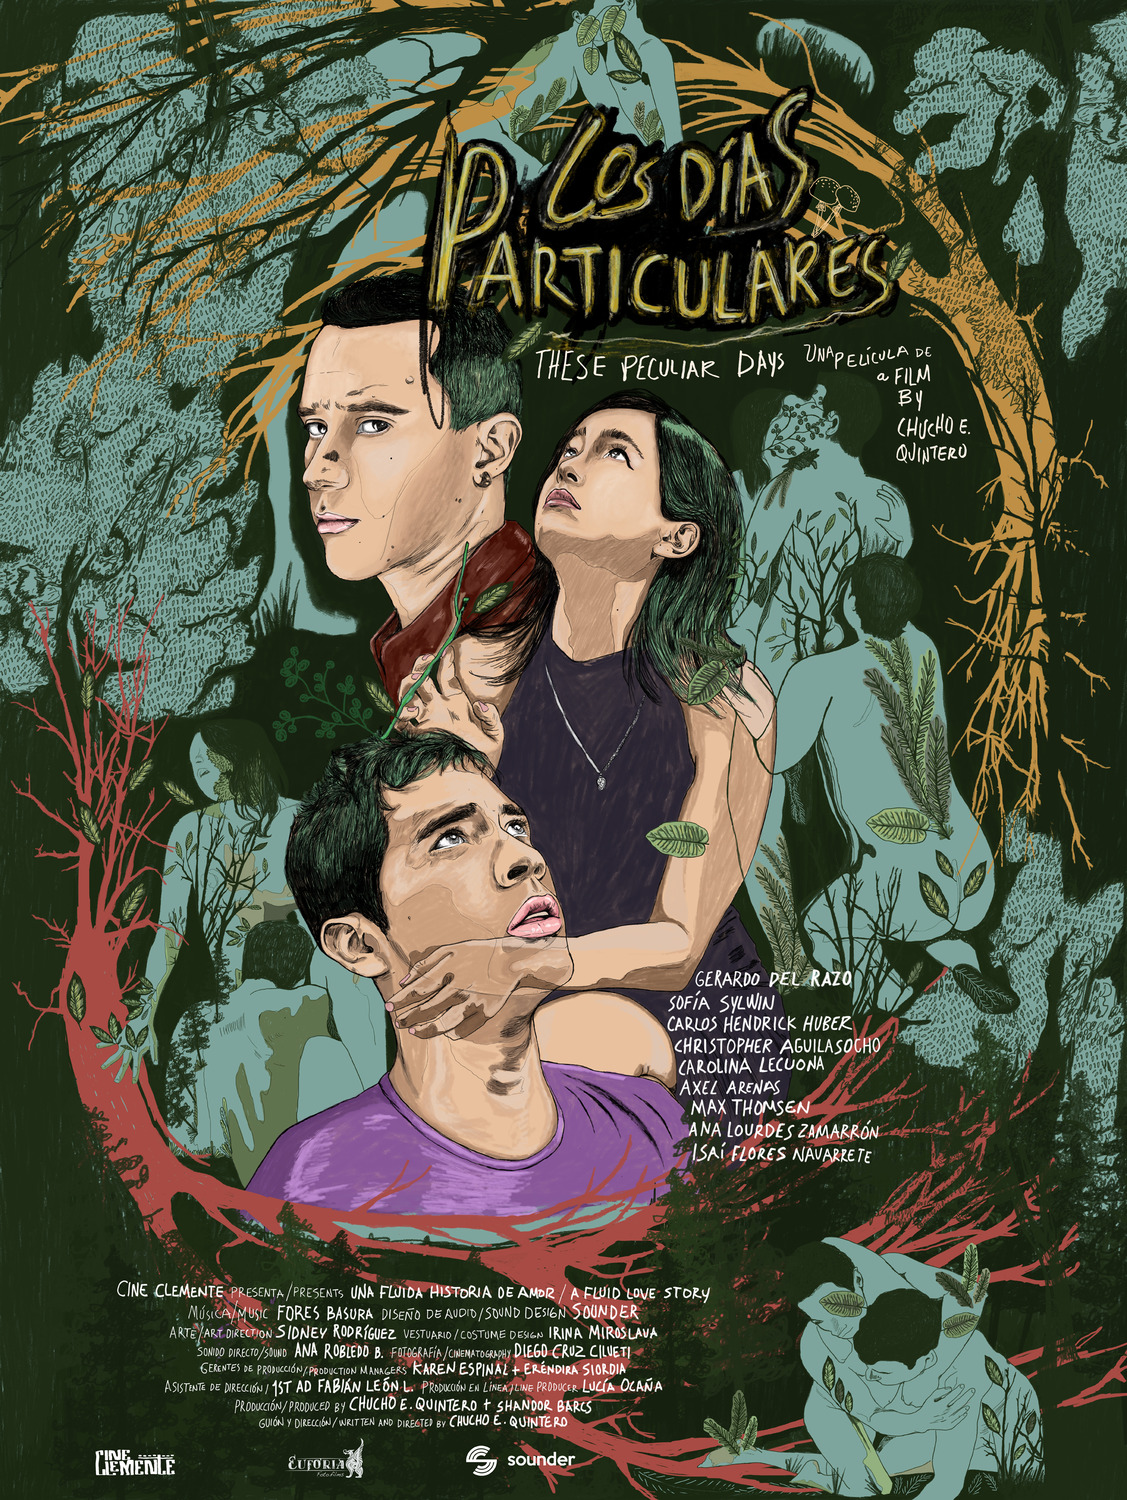 Extra Large Movie Poster Image for Los días particulares 